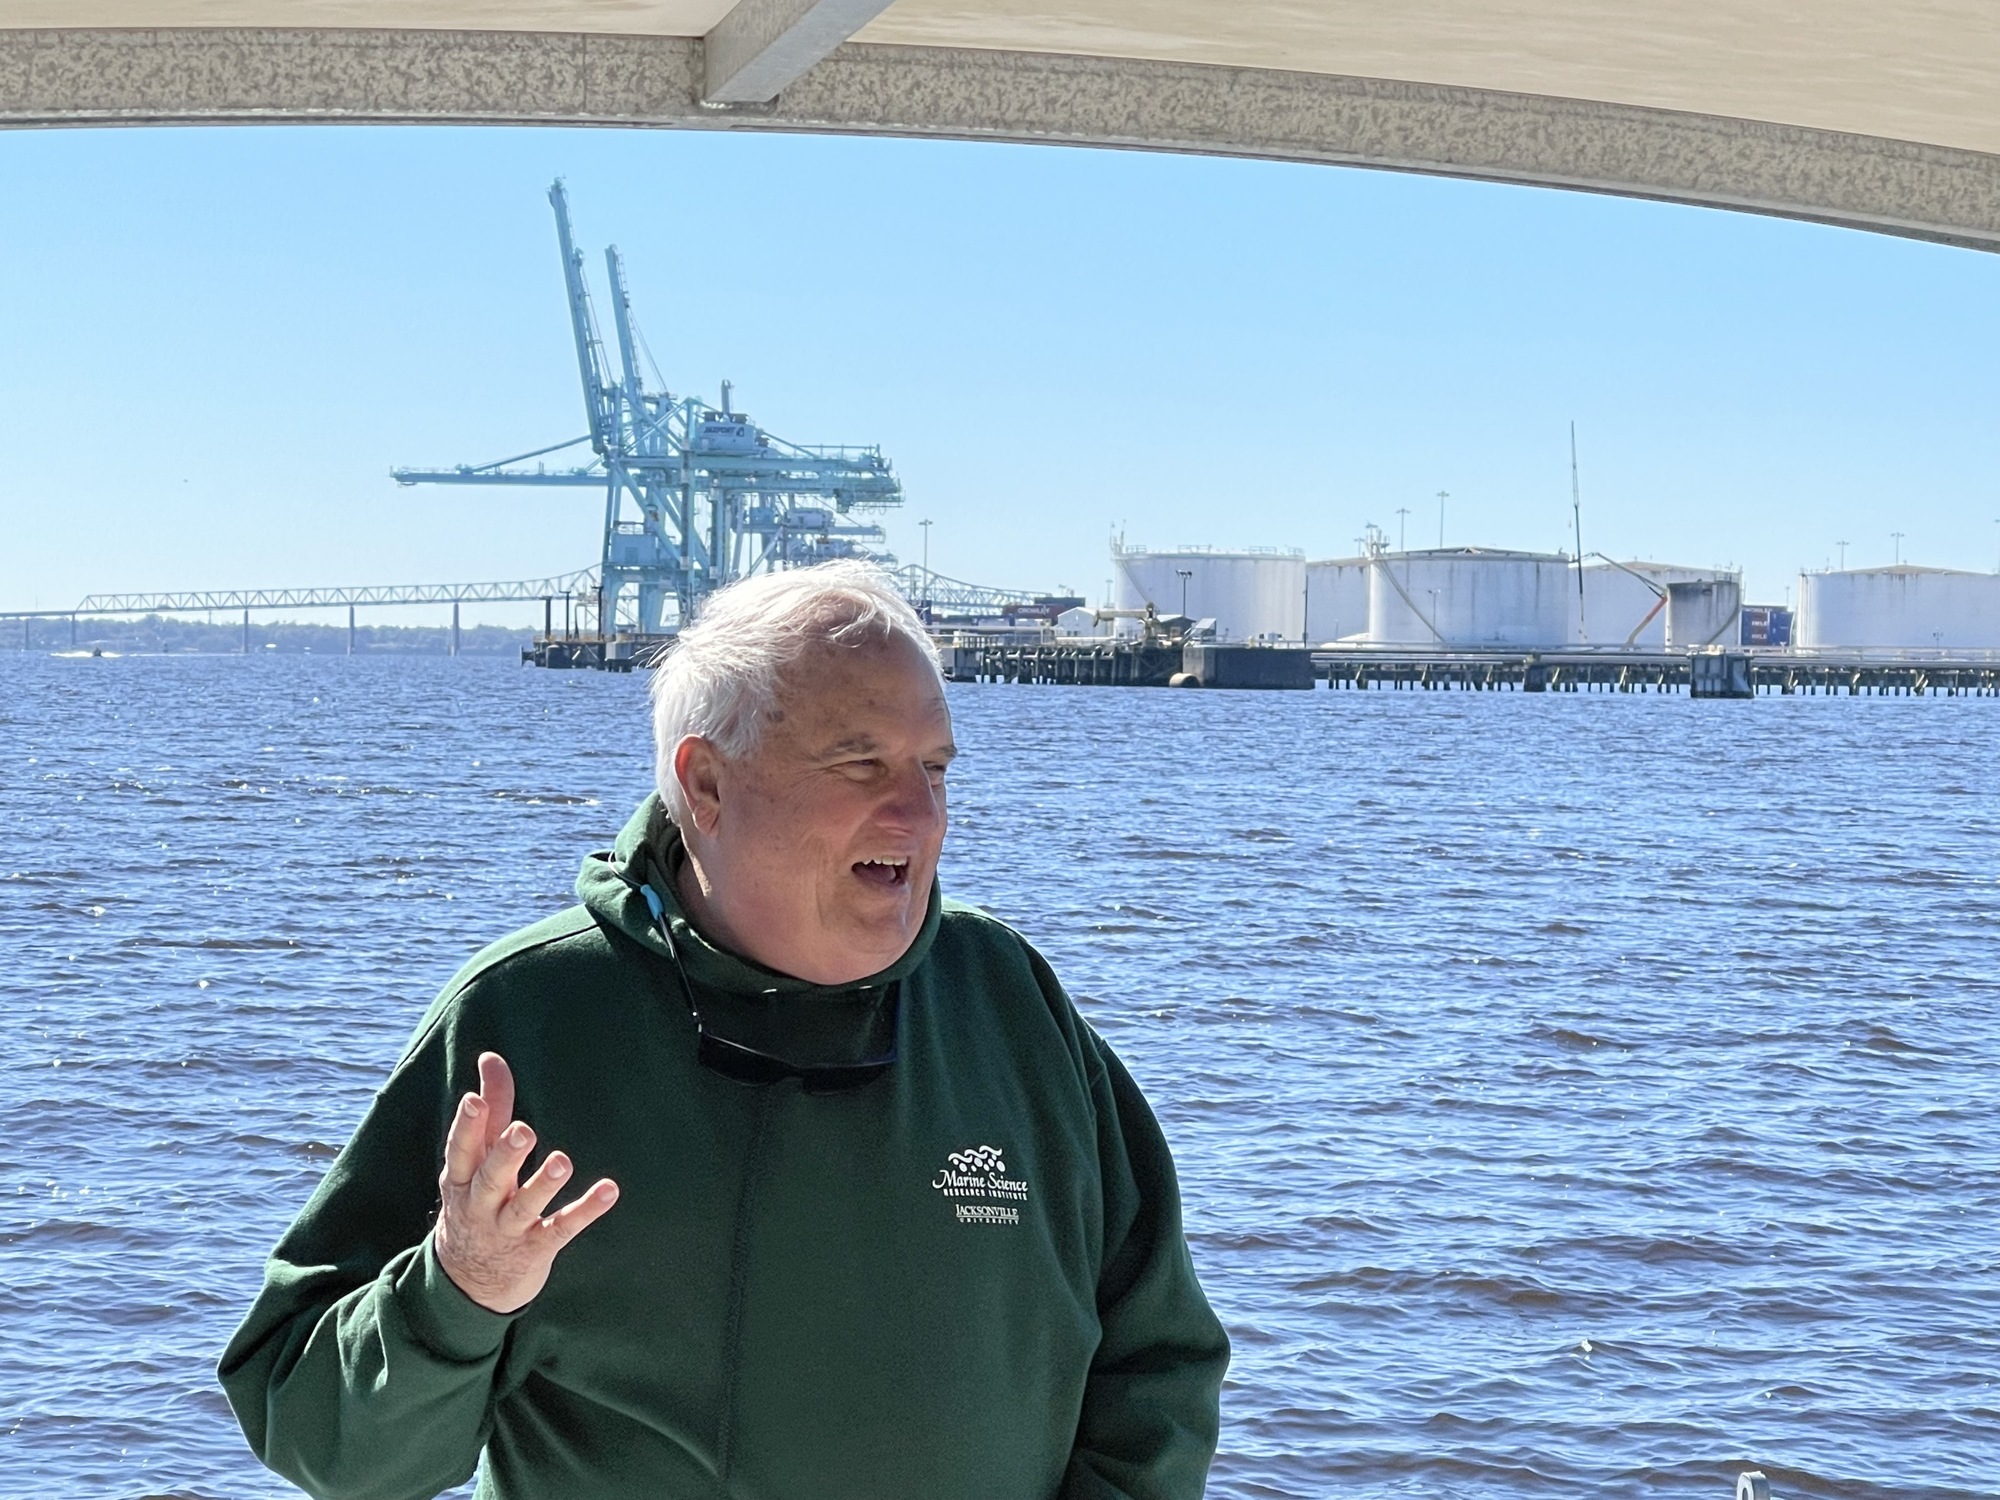 Jacksonville University Professor and Executive Director of the JU Marine Science Research Institute Quinton White speaks about the St. Johns River and the Connected initiative.